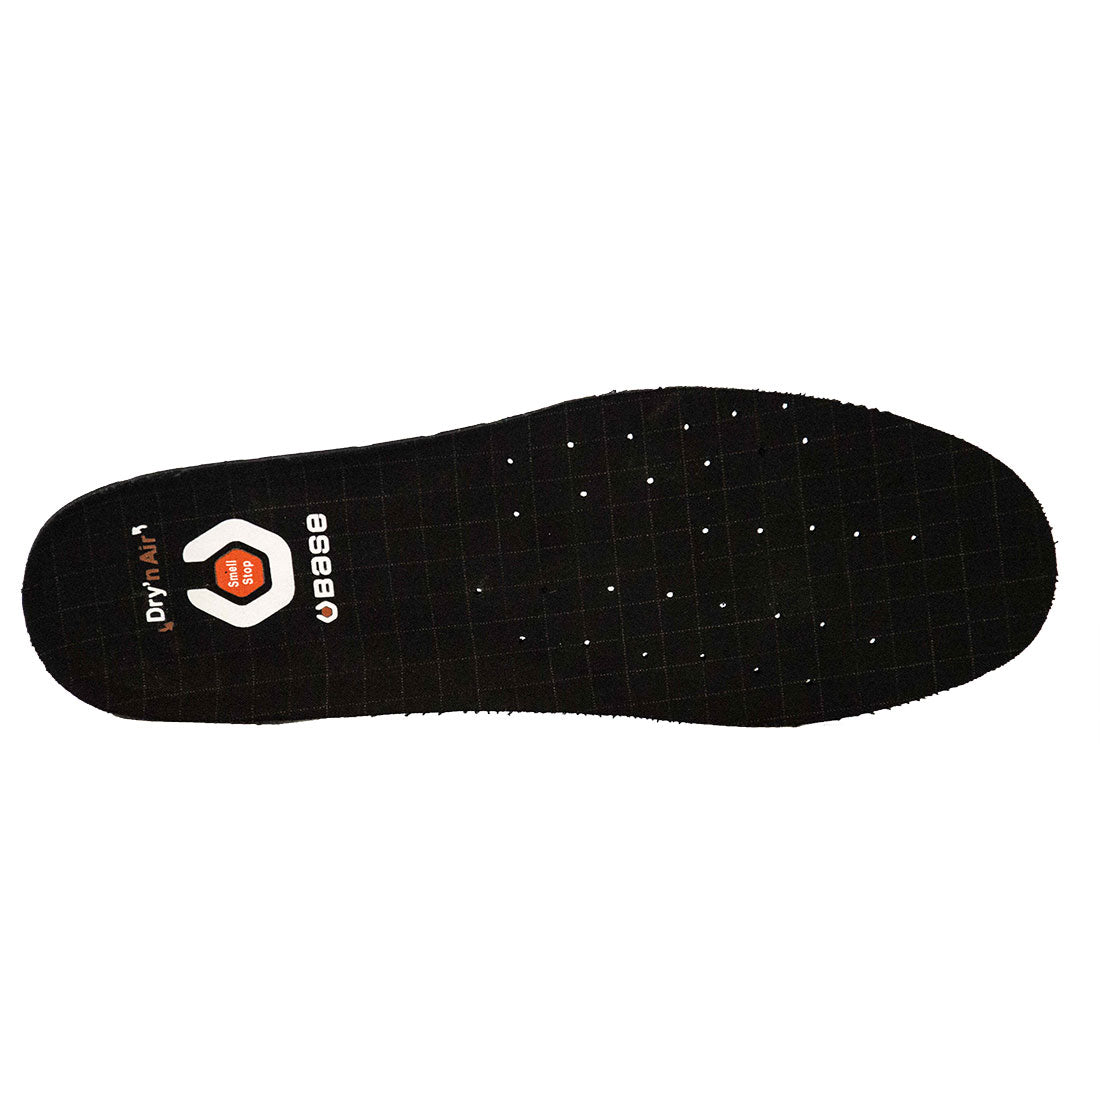 Base Protection Omnia ESD Insoles